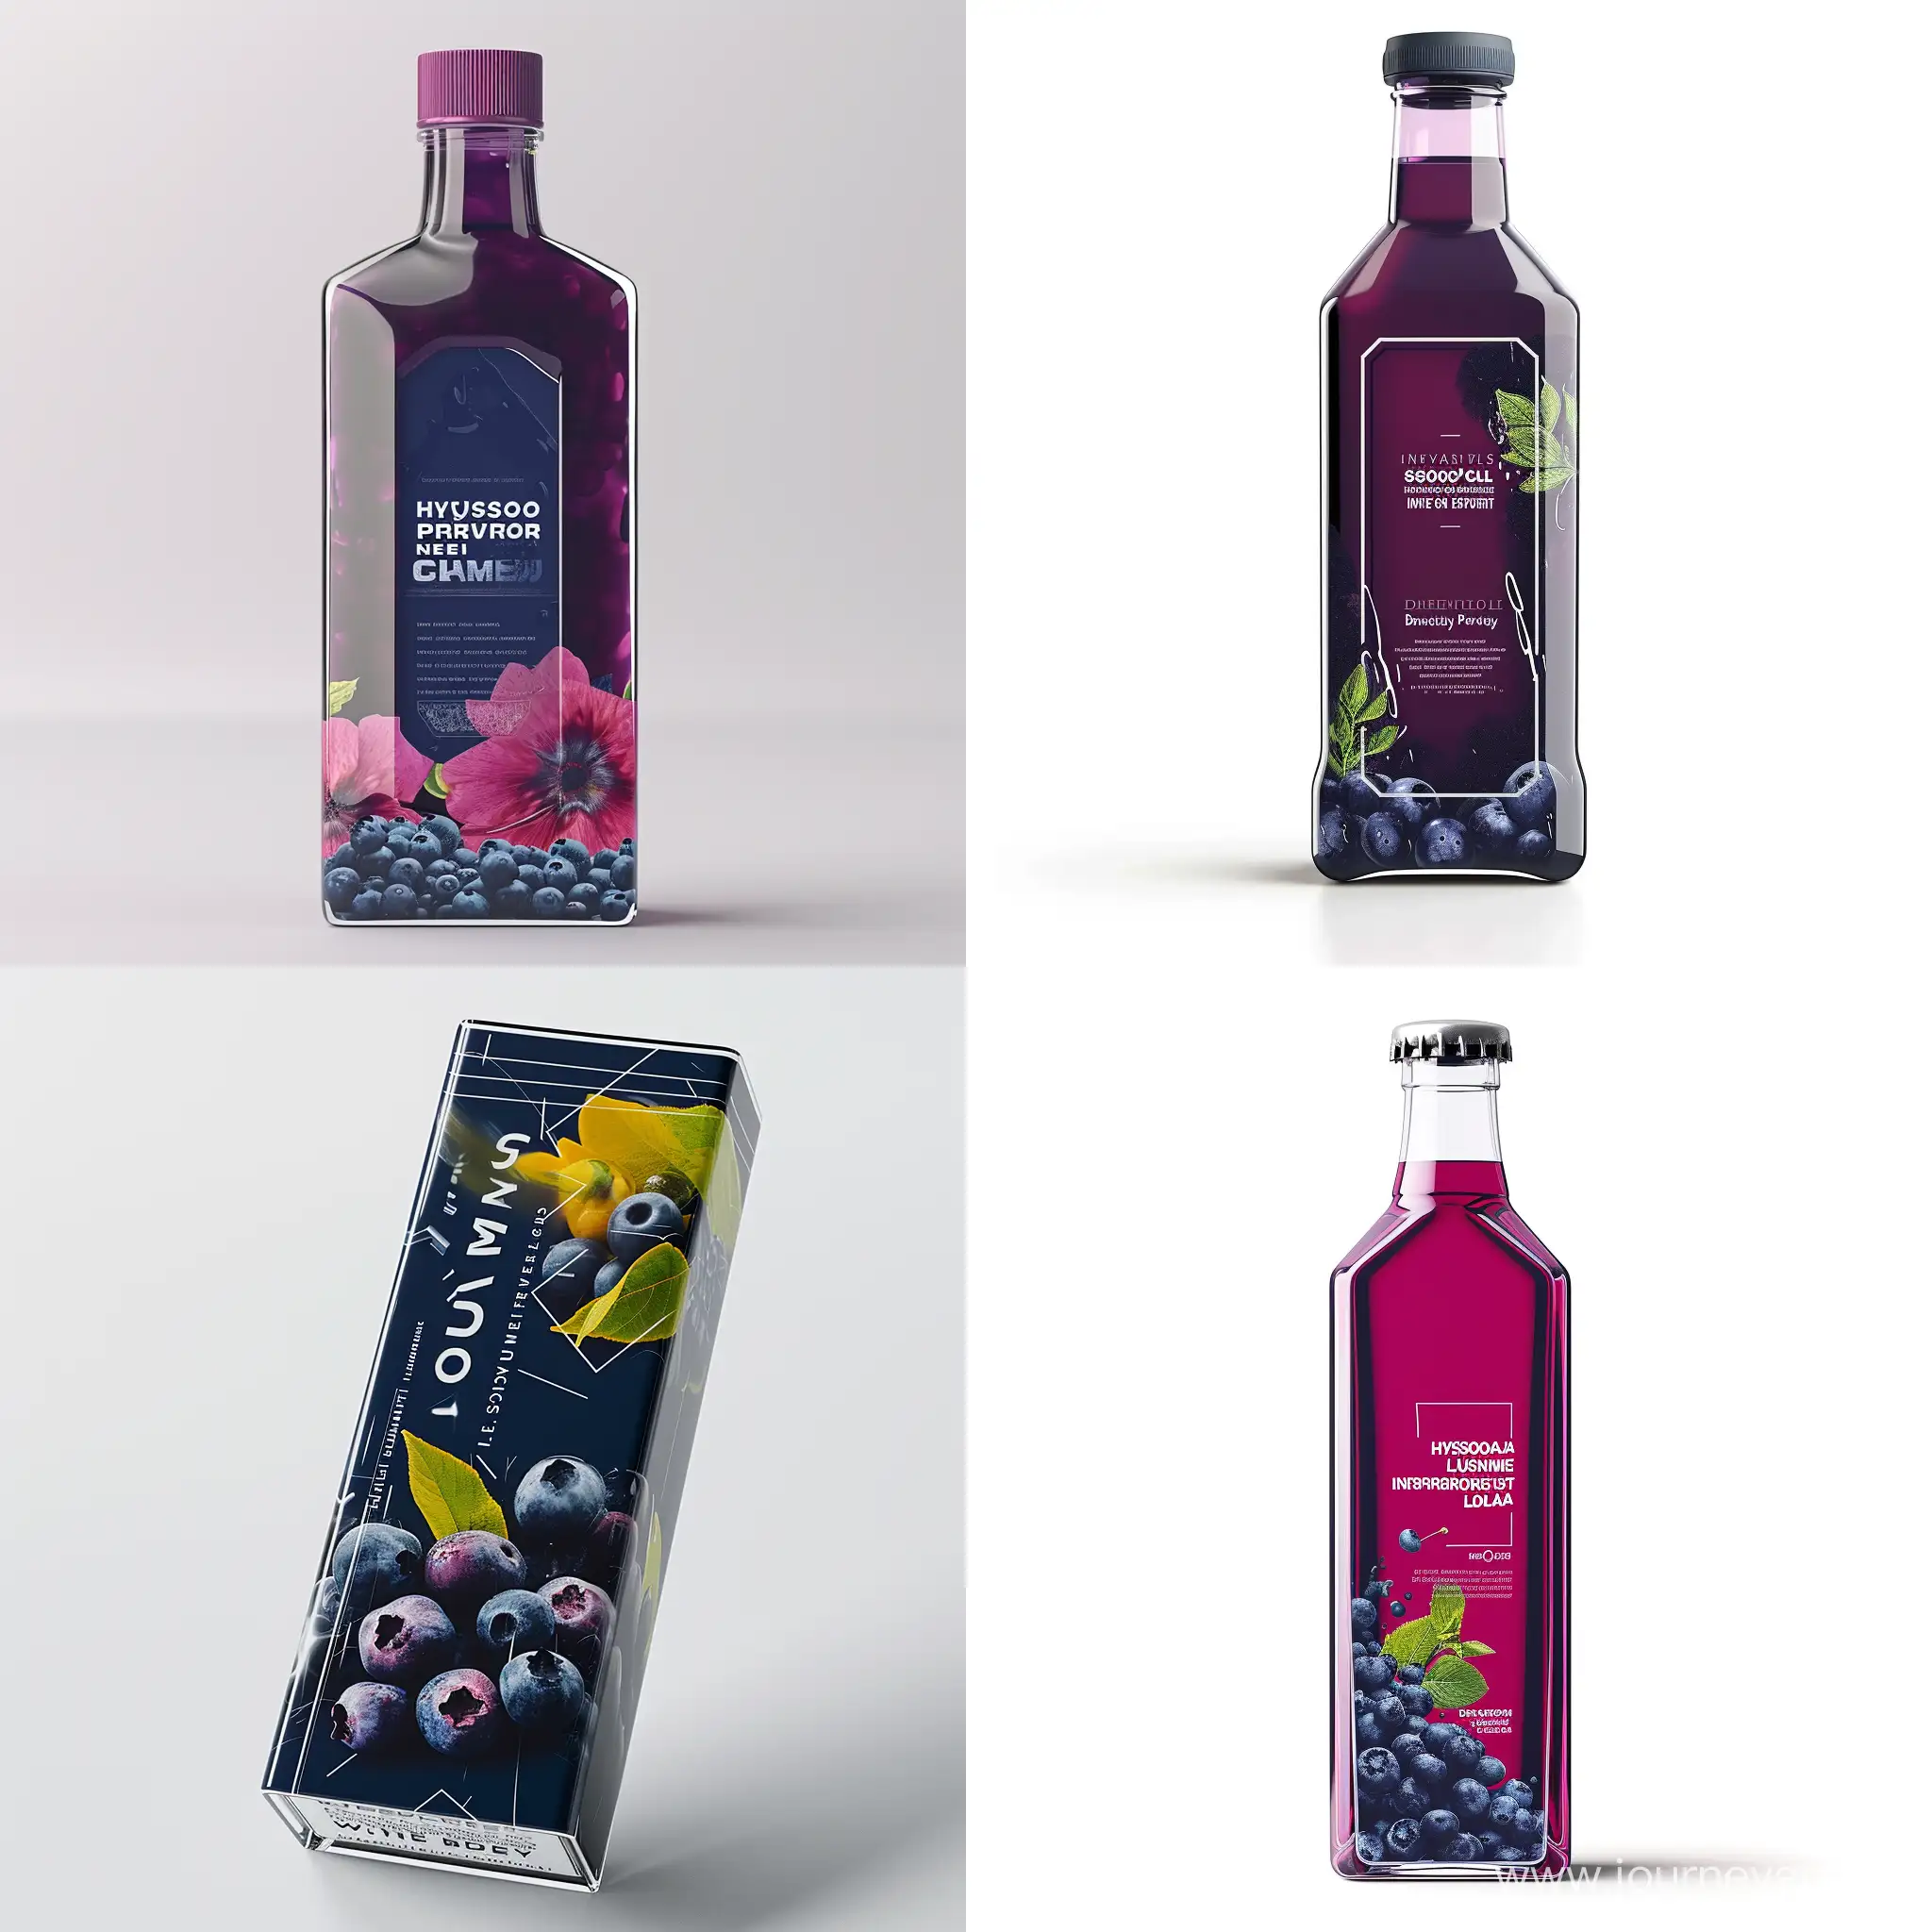 hysotonic beverage rectangular bottle, blueberry fruit flavor, minimalistic design, INNOVATIVE GRAPHIC DESIGN, product design, futuristic lines and texture designs, LABEL WITH POWER CLAIMS, LABEL WITH blueberry fruits, best graphic design winner